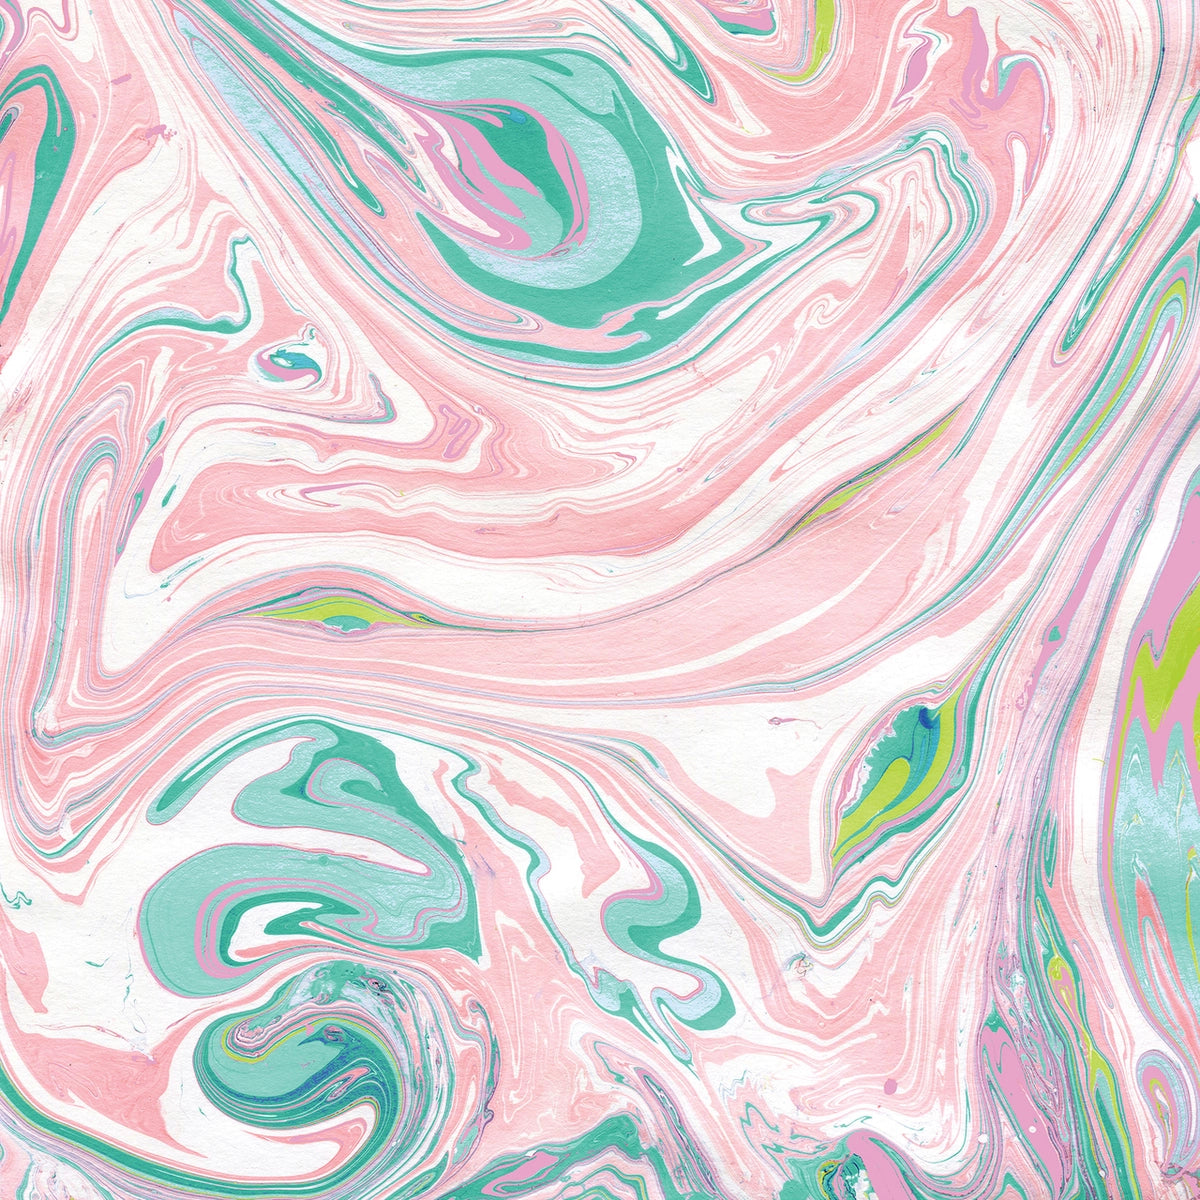 Side B - pink, white, and turquoise marble abstract pattern